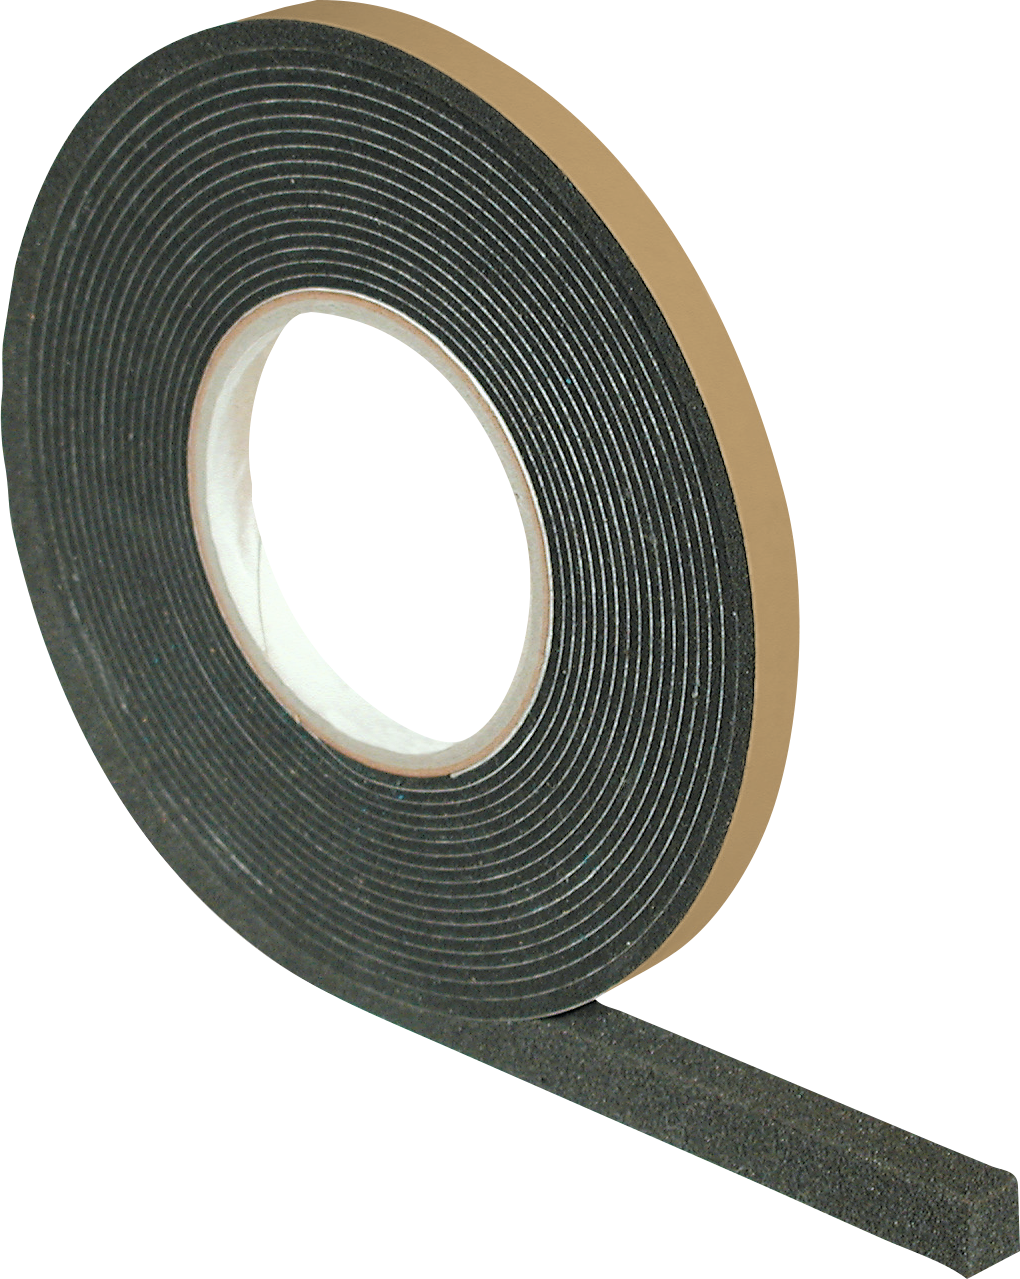 OTTO FUGENBAND BG1 10/3 A VE 110M 10M/ROLLE